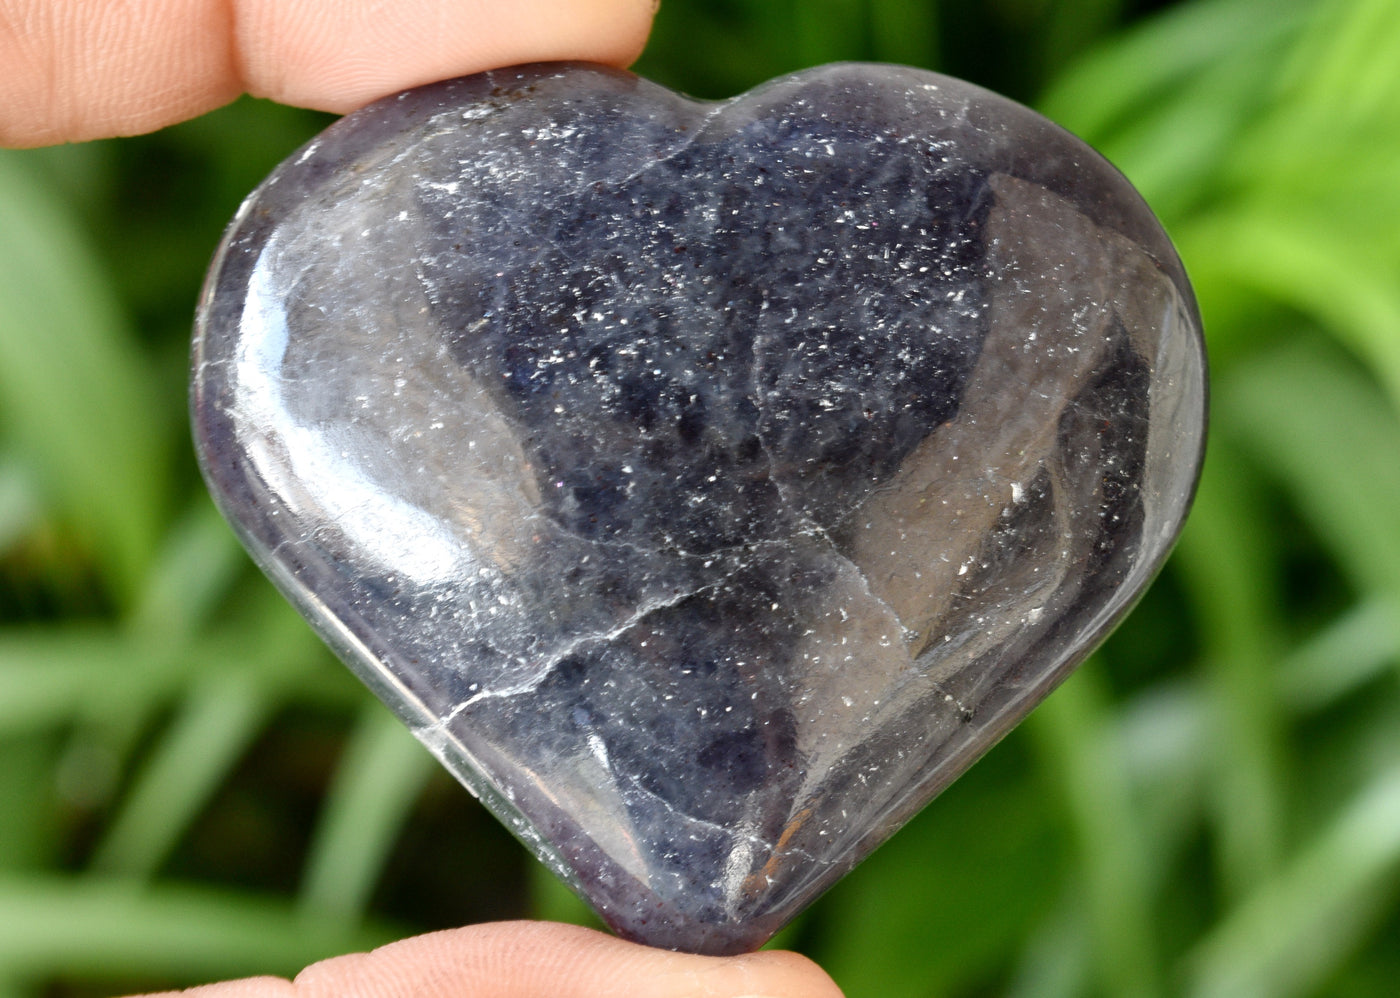 Polished Iolite Heart Crystal, 2 Inch Pocket Heart Large Puffy Crystal Heart